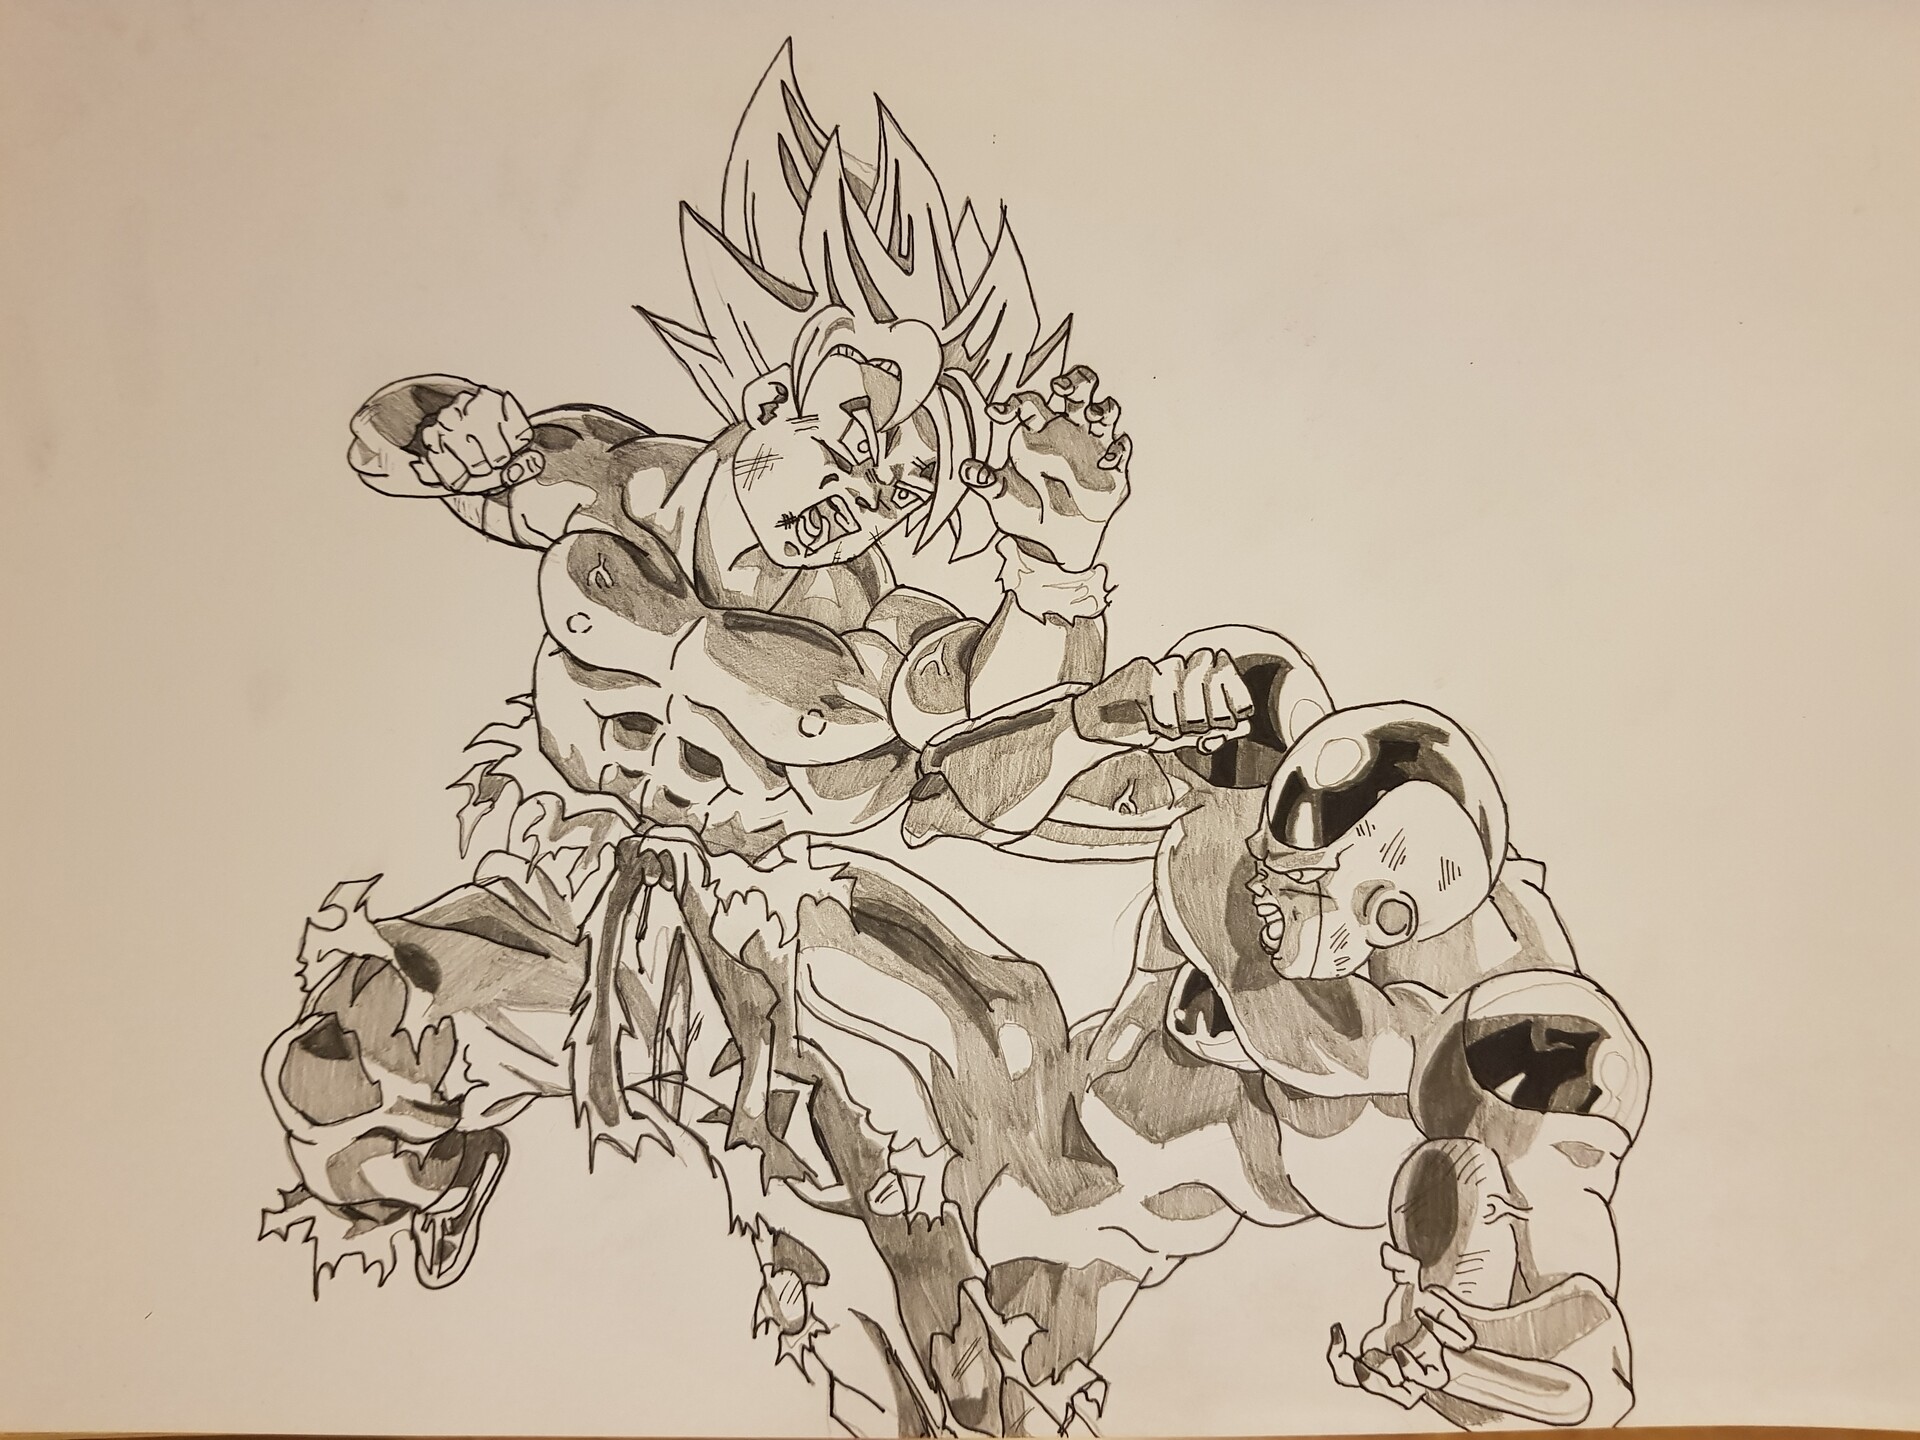 Doing a drawing everyday Heres Goku and Frieza Hope you like it   rDragonballsuper